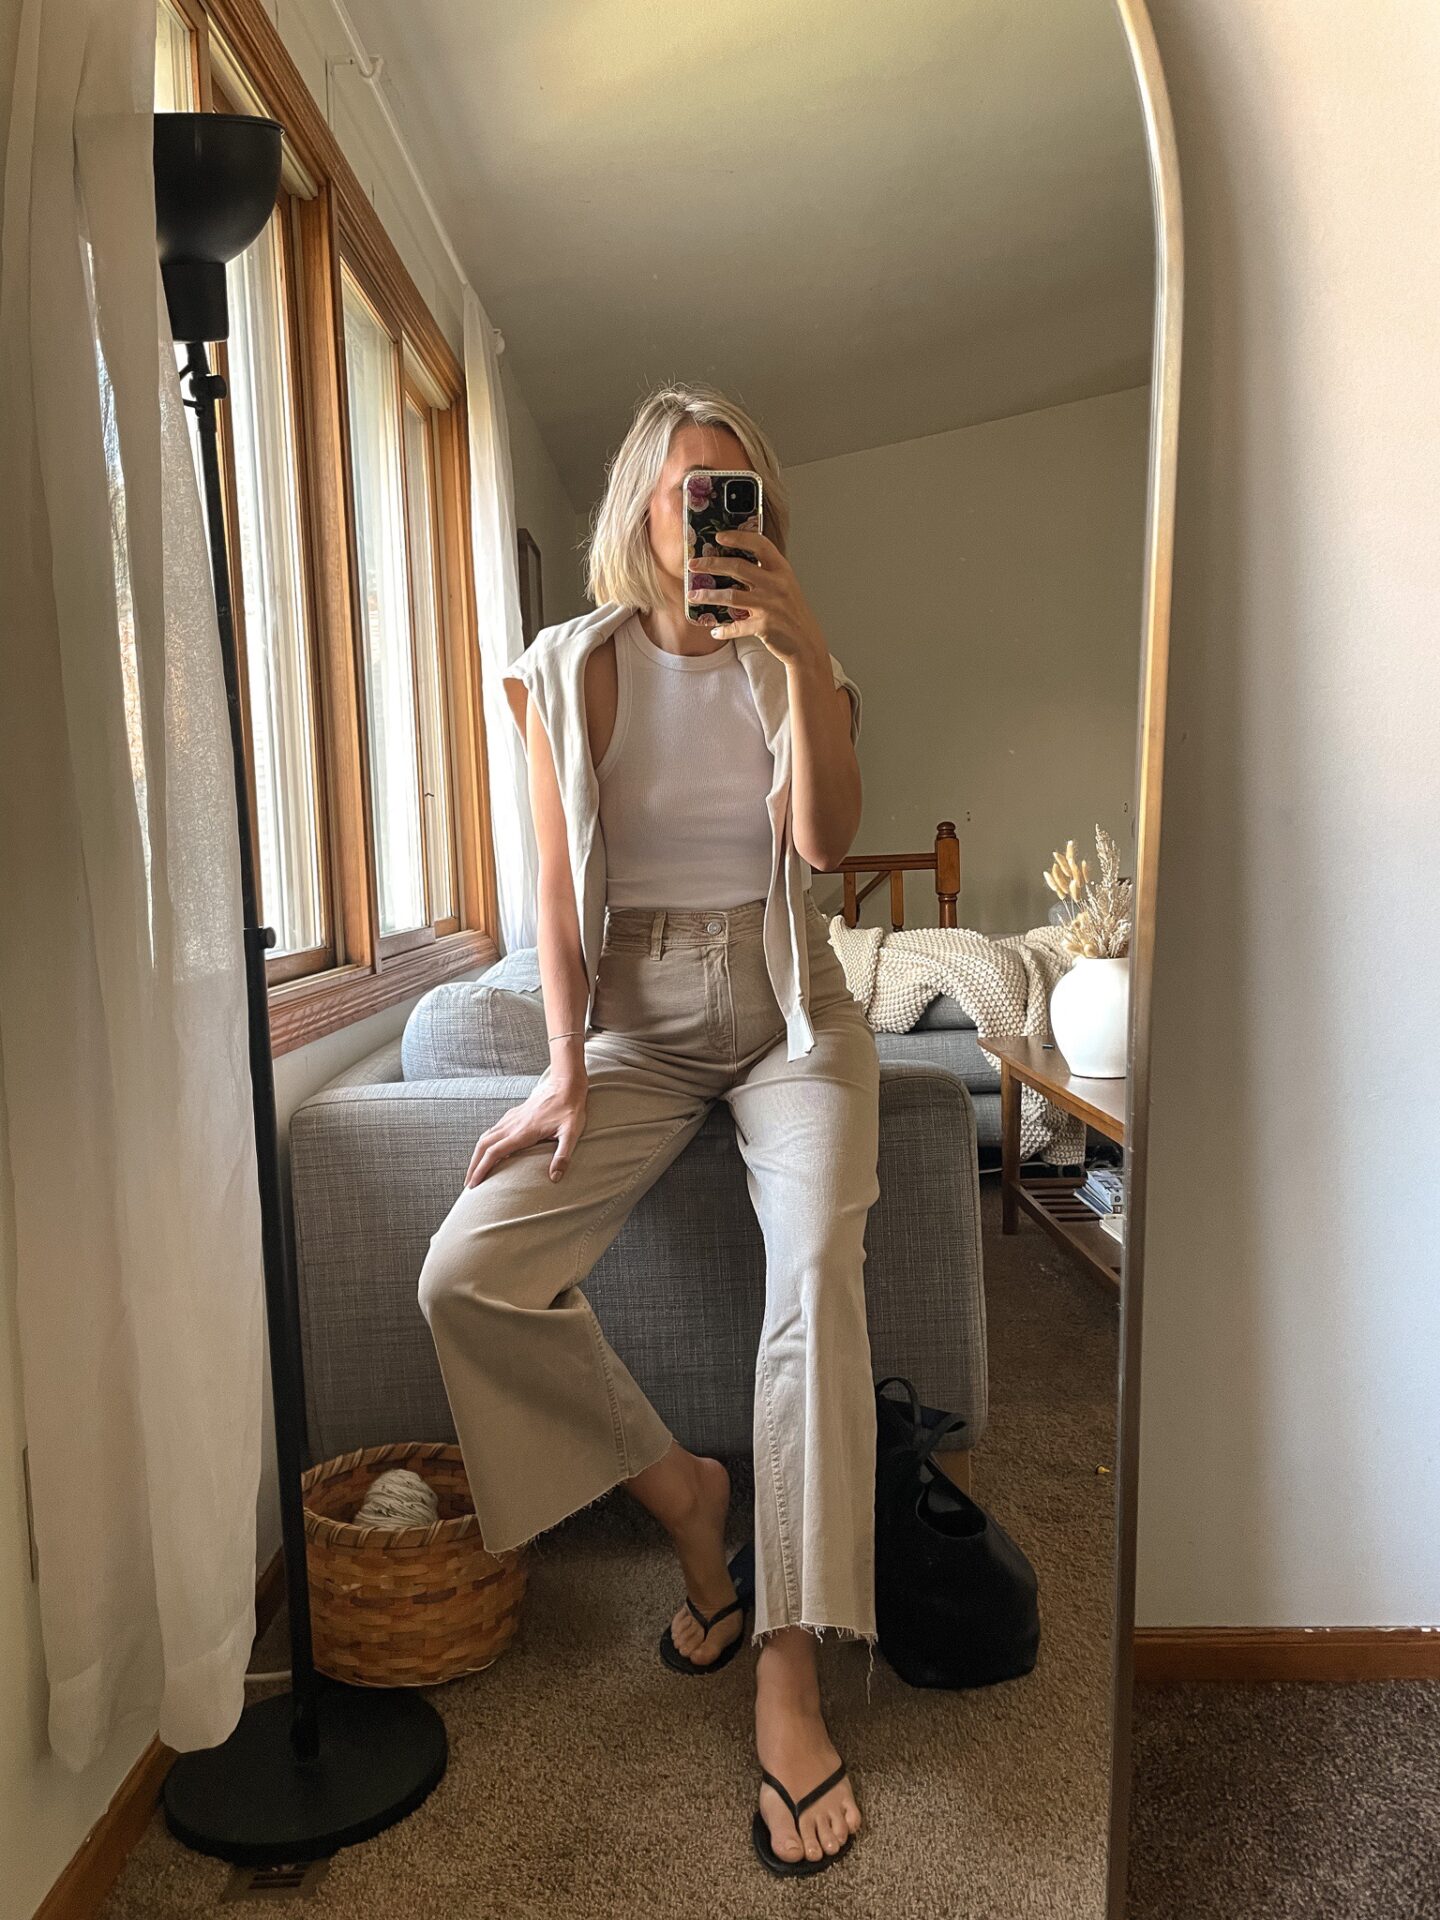 Karin Emily wears a khaki brown pair of wide leg jeans, a white anine bing tank, black flip flop sandals, and an oatmeal layering sweater over her shoulders